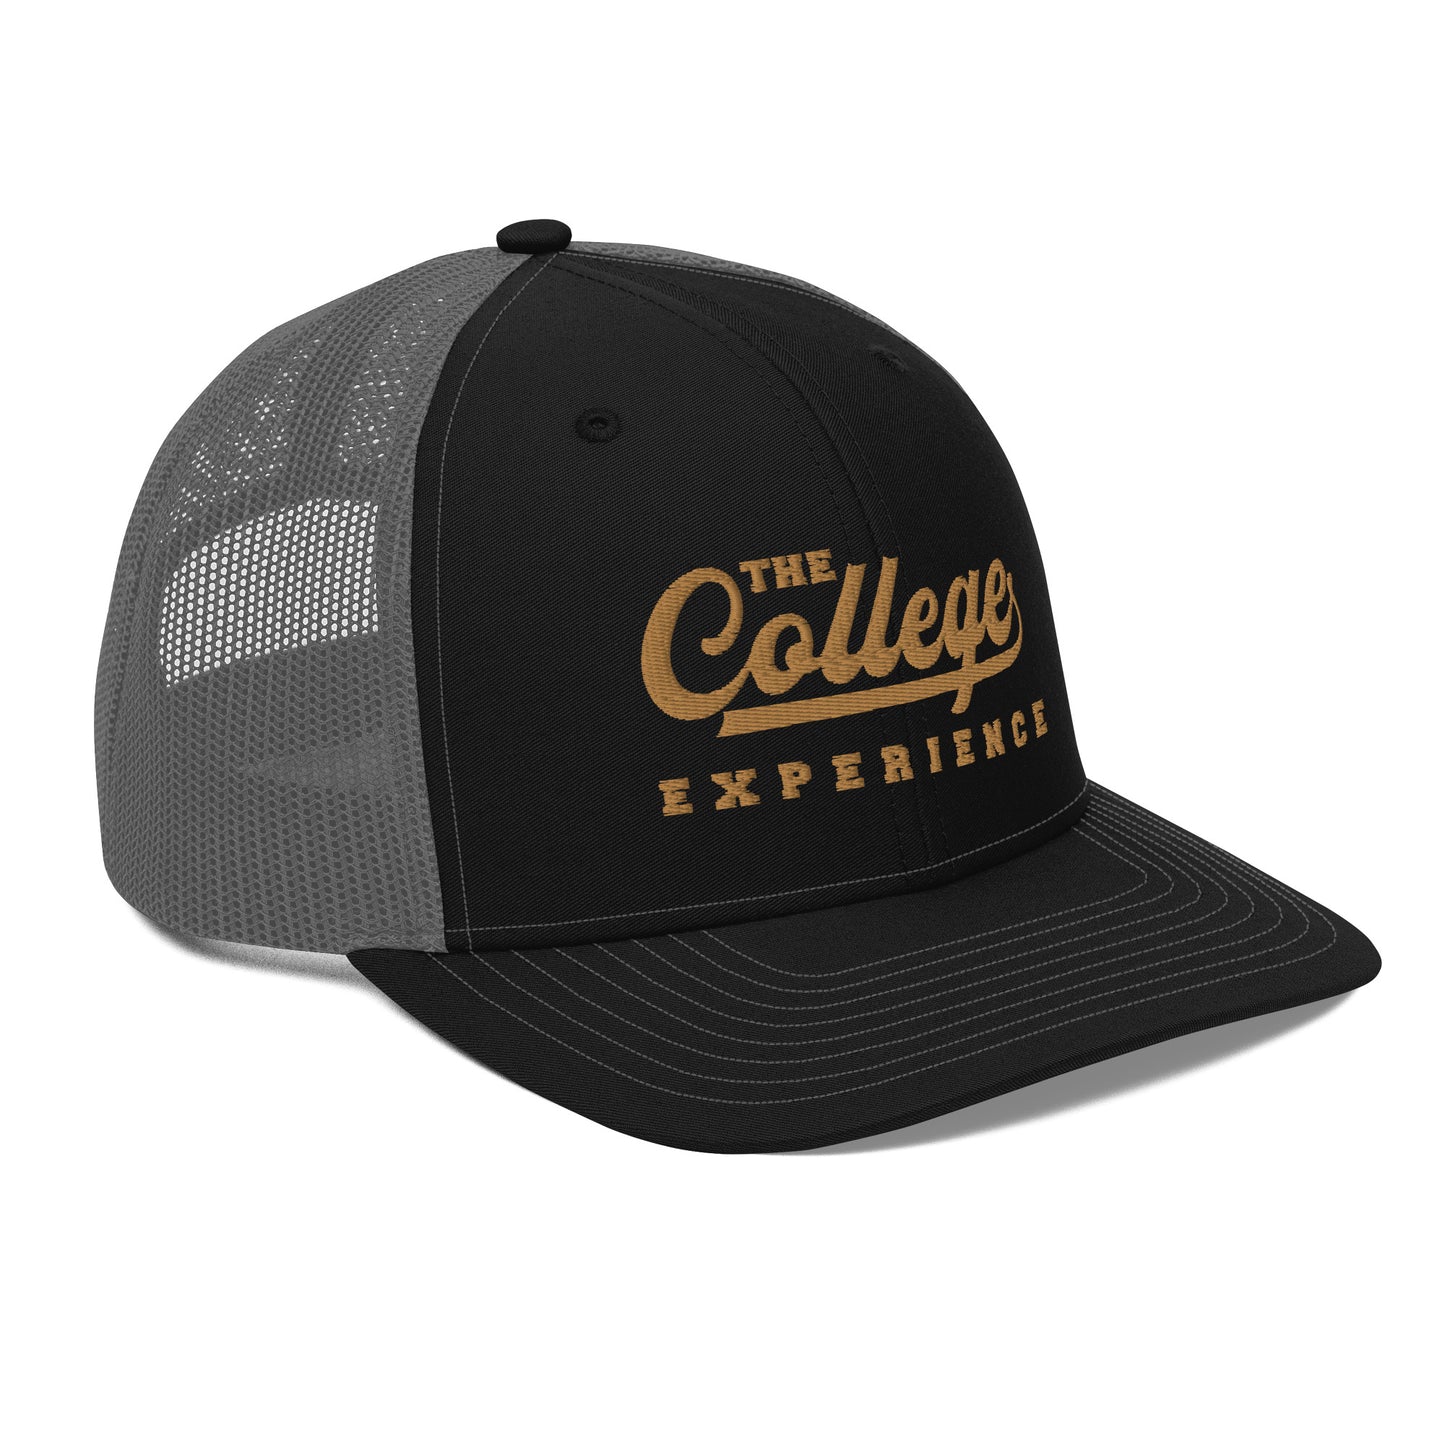 The College Experience - Trucker Cap (Gold Embroidery)